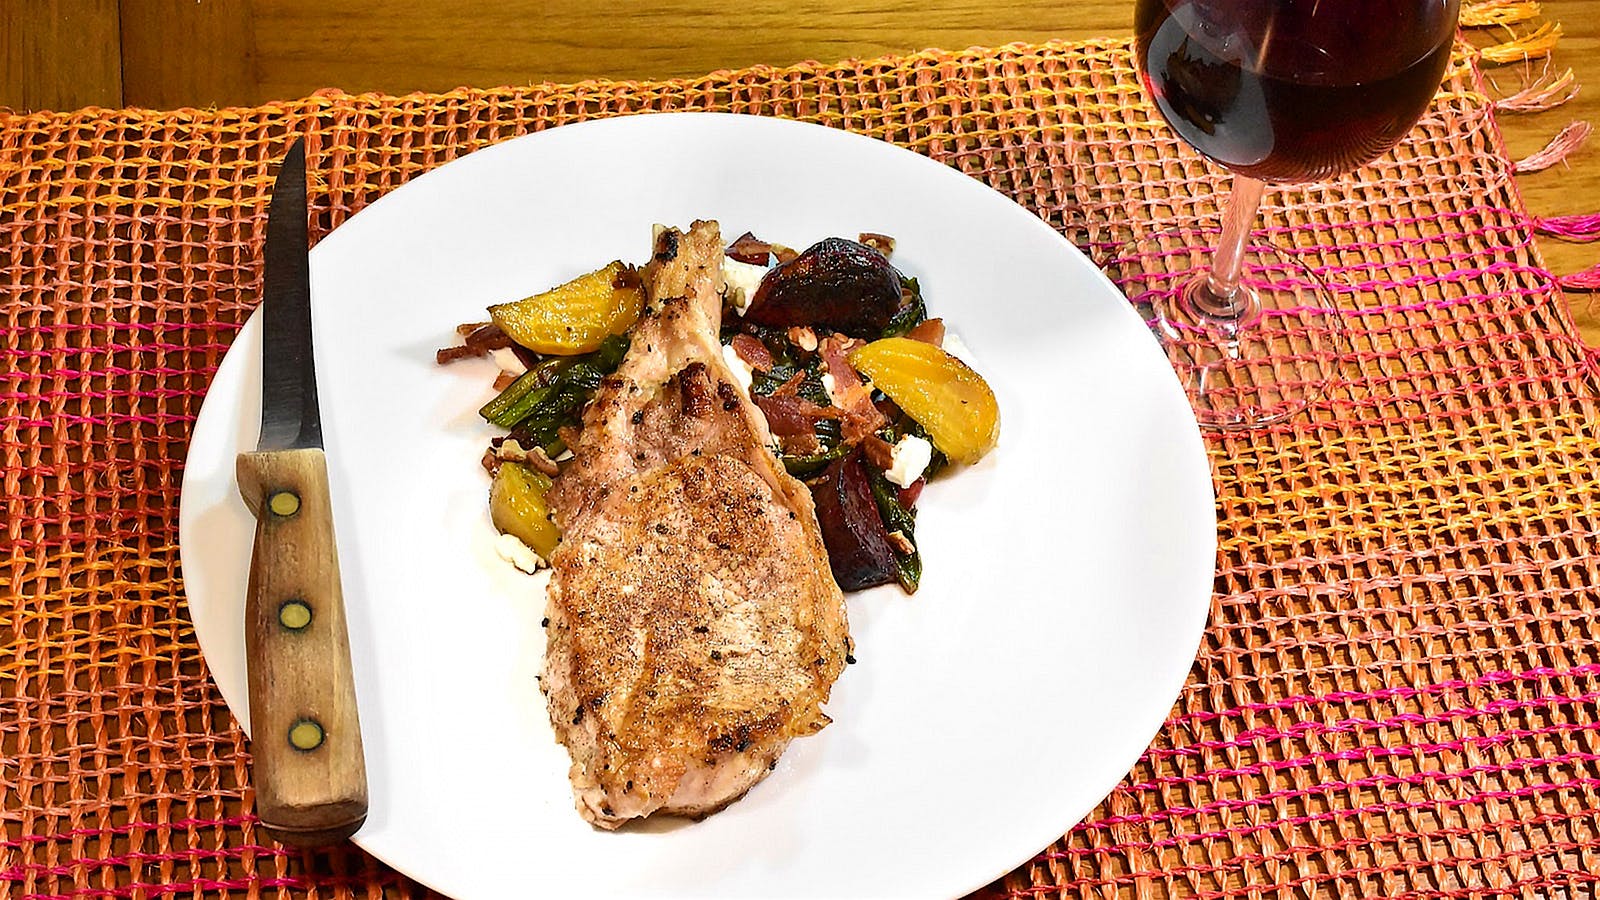 8 & $20: Pork Chops with Roasted Beets and Beet Greens